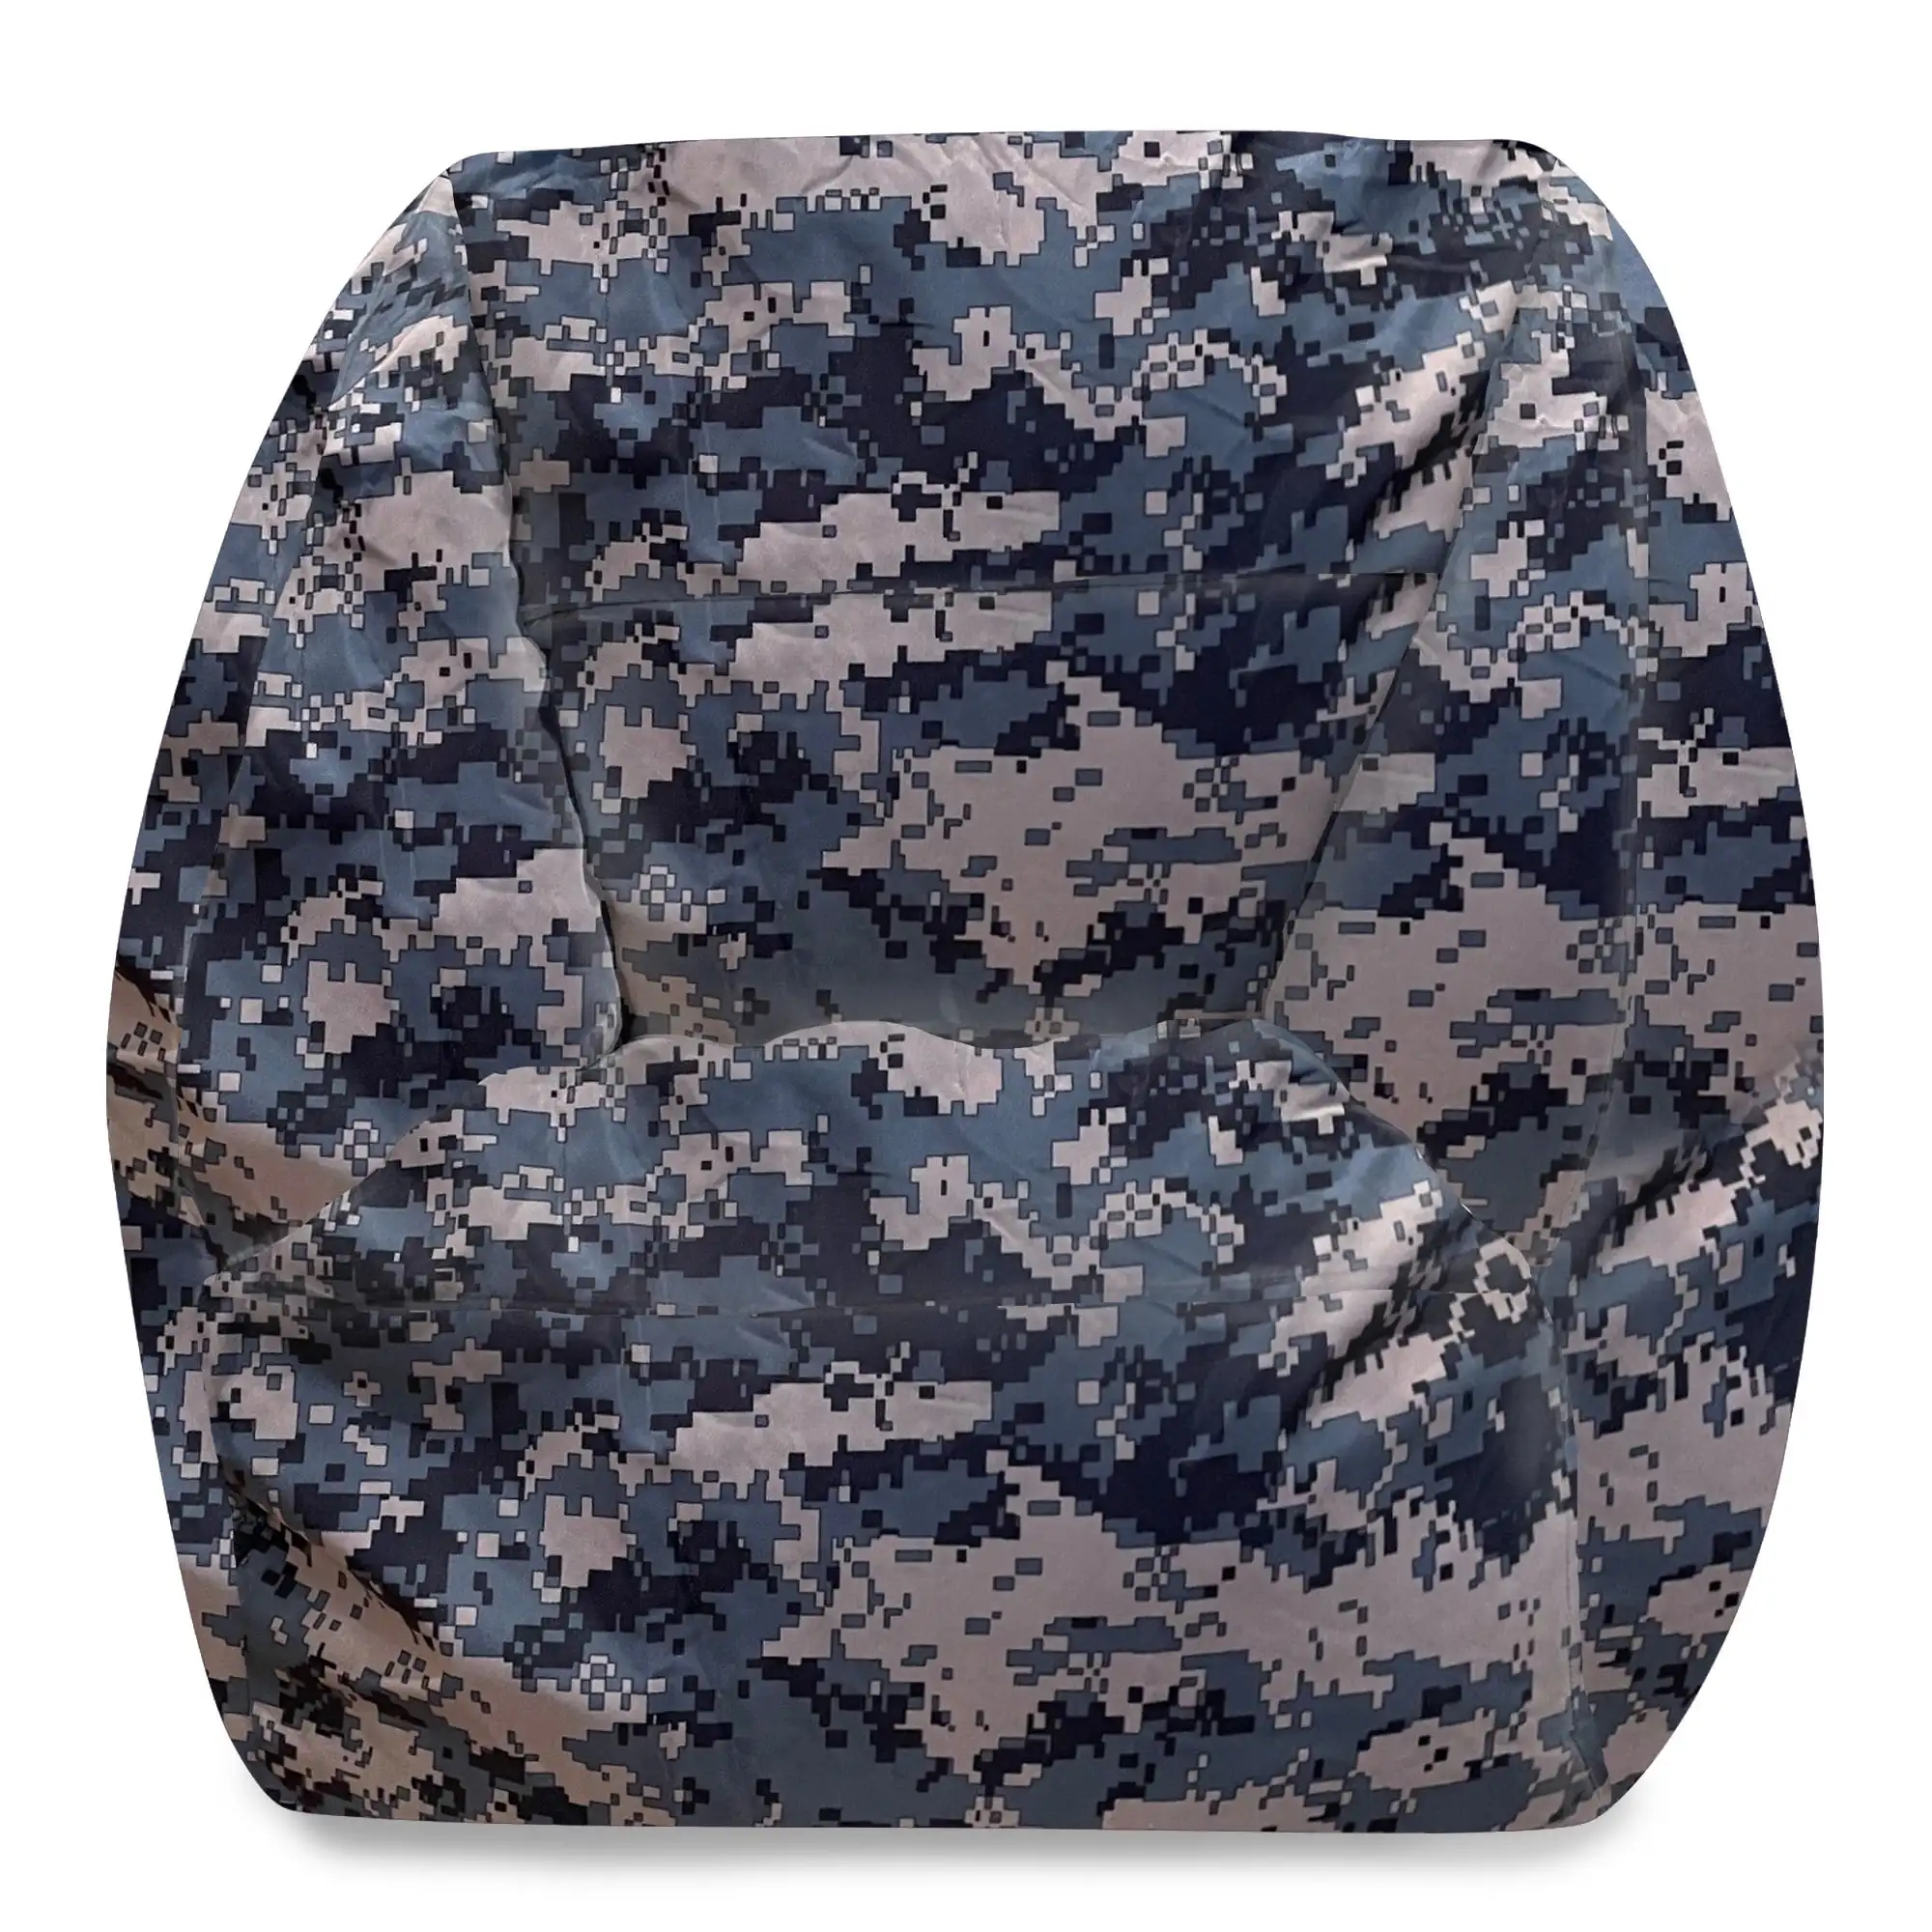 

Structured Comfy Bean Bag Chair, Nylon Lazy Floor Sofa for Living Room Bedroom Fluffy Couch with Filling - Camo Digital